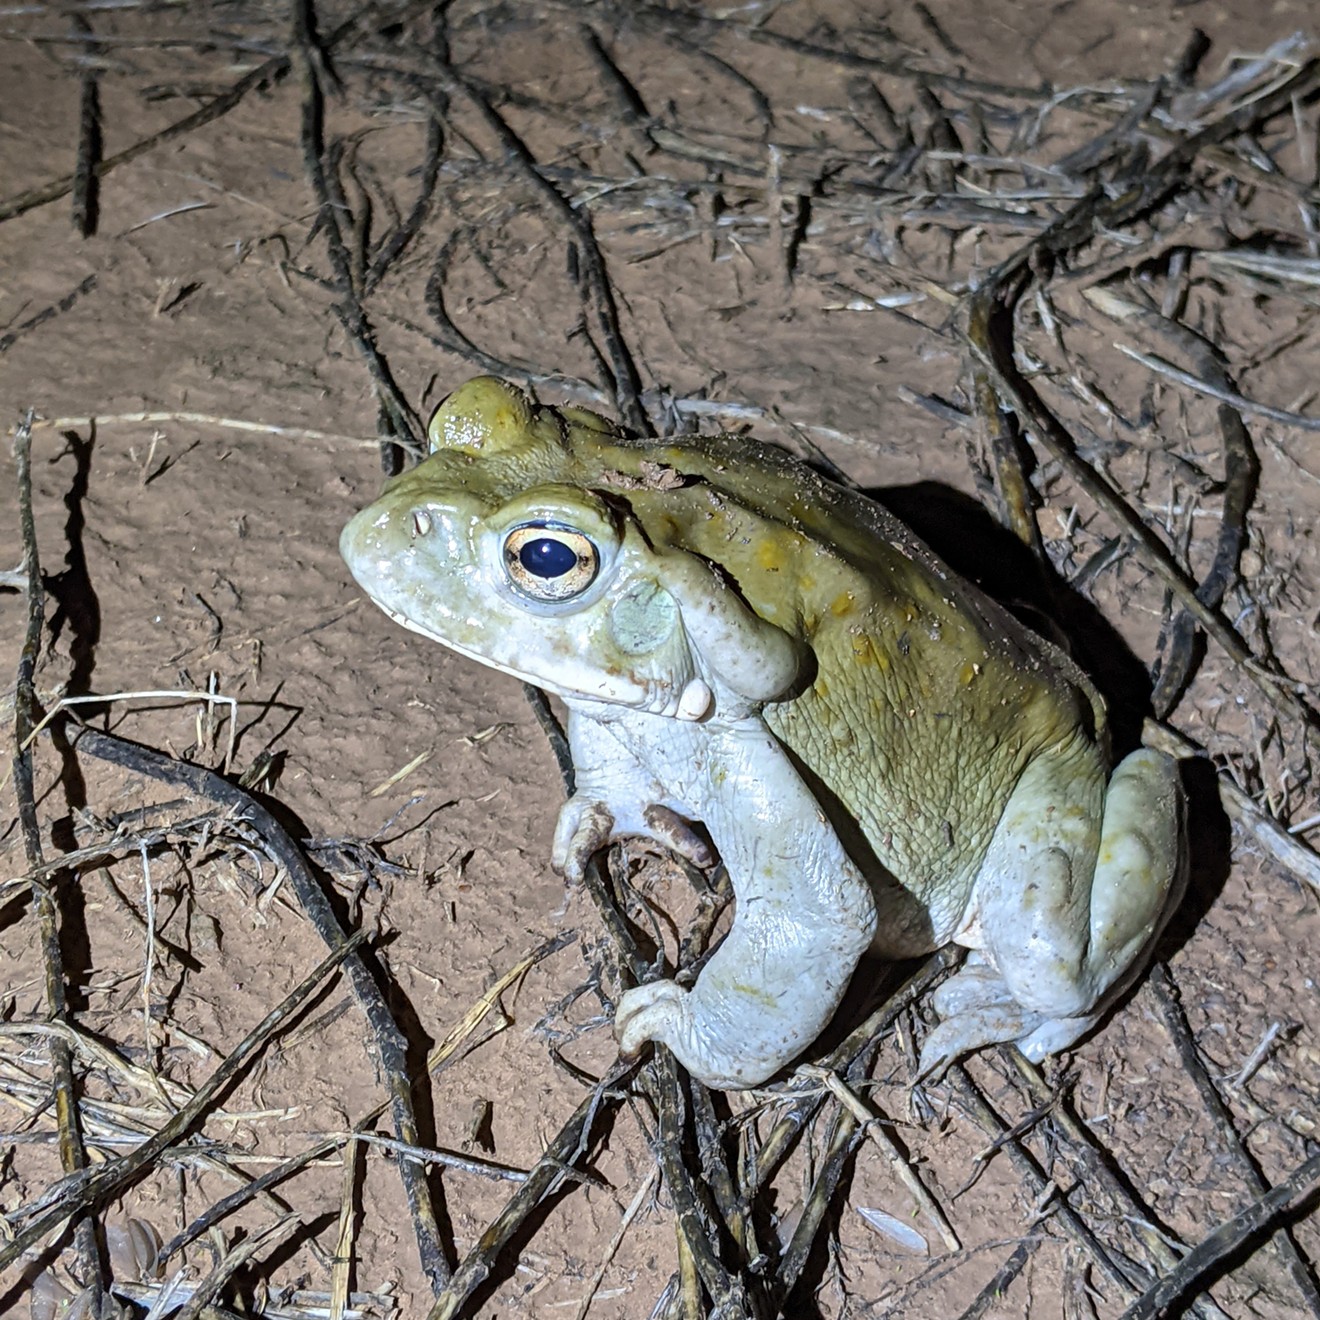 A Sonoran Desert toad.